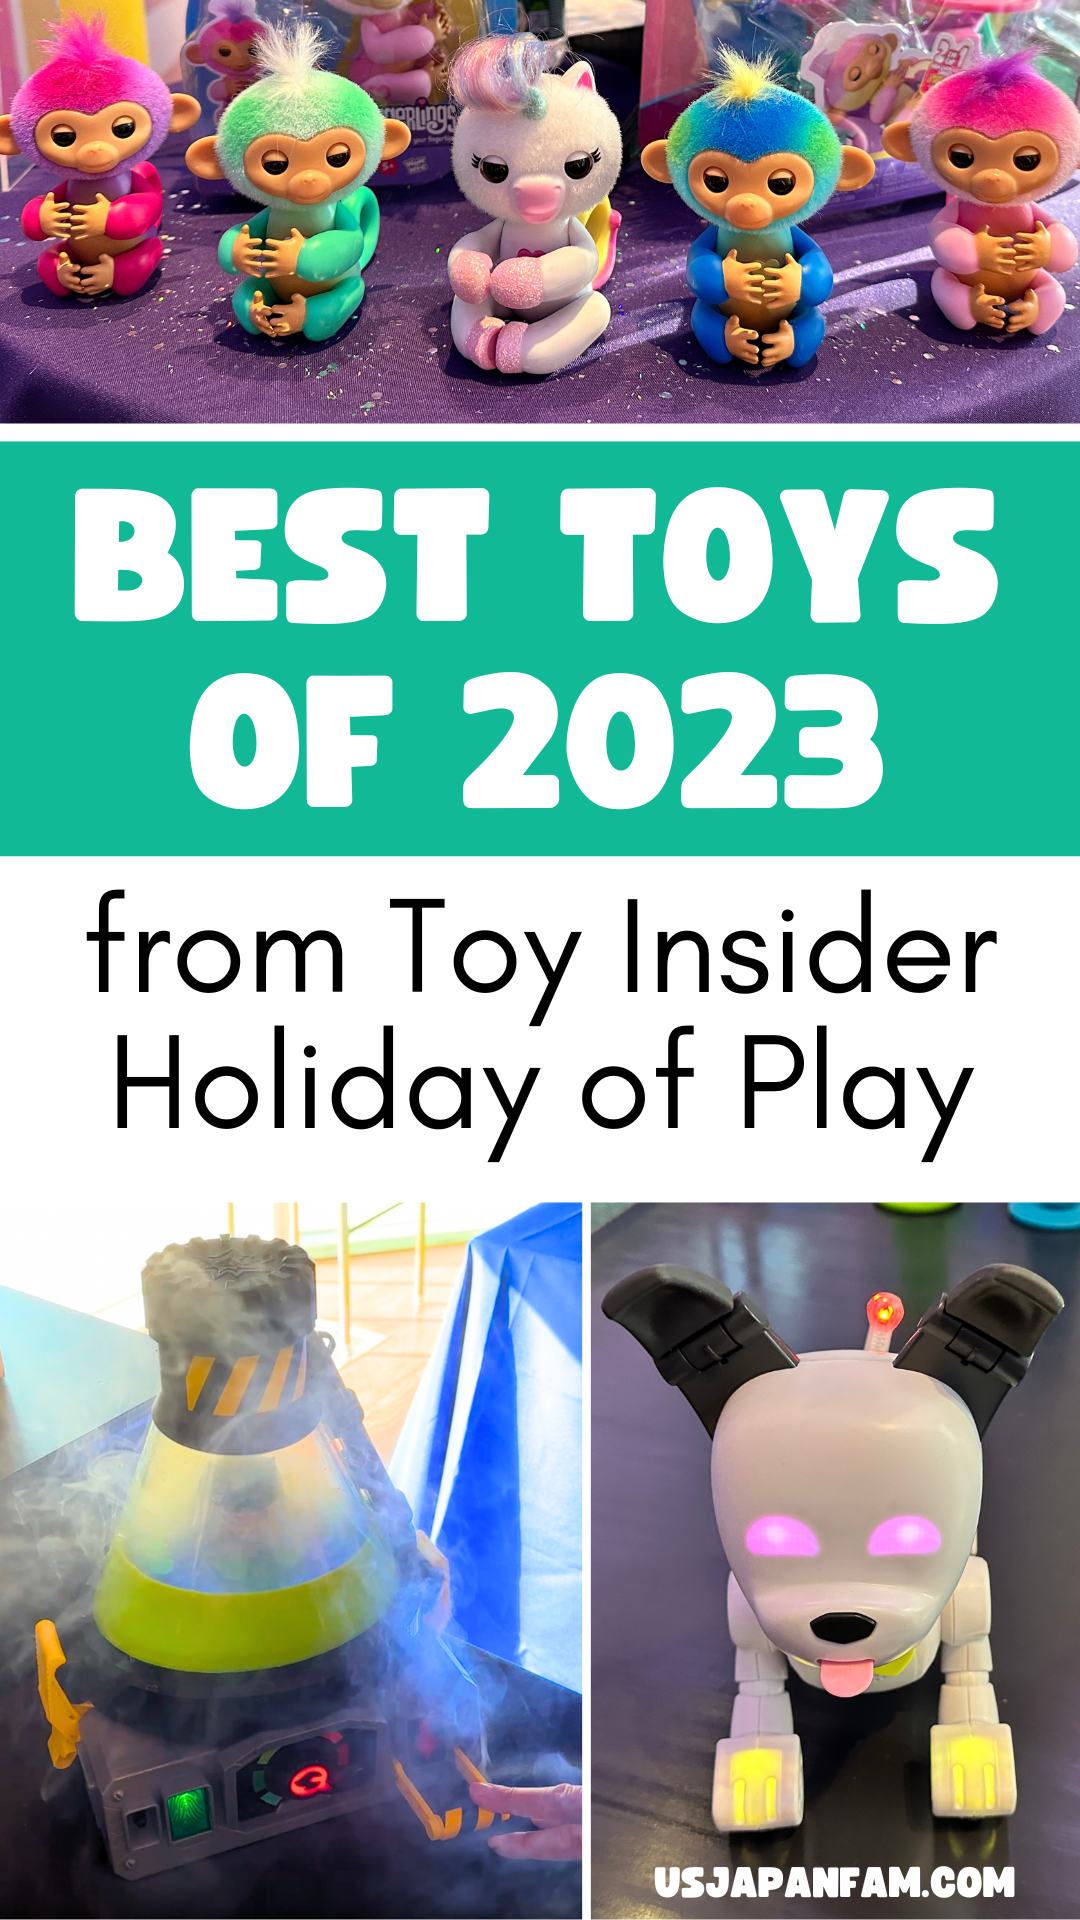 Best Toys of 2023 @ Toy Insider Holiday of Play - US Japan Fam